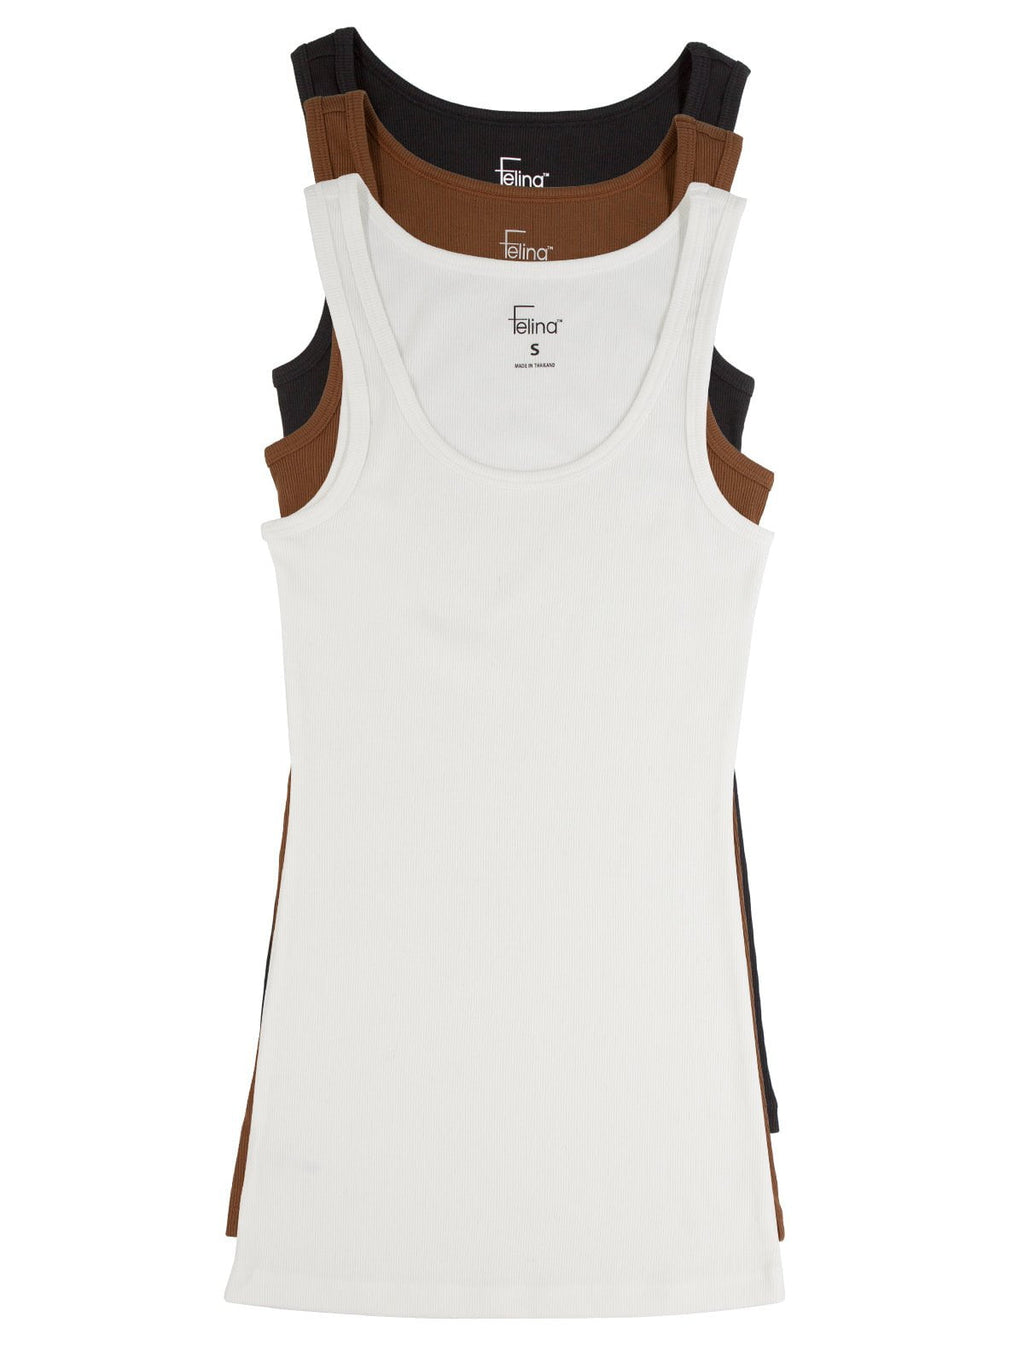 Ribbed Tank Tops for Women